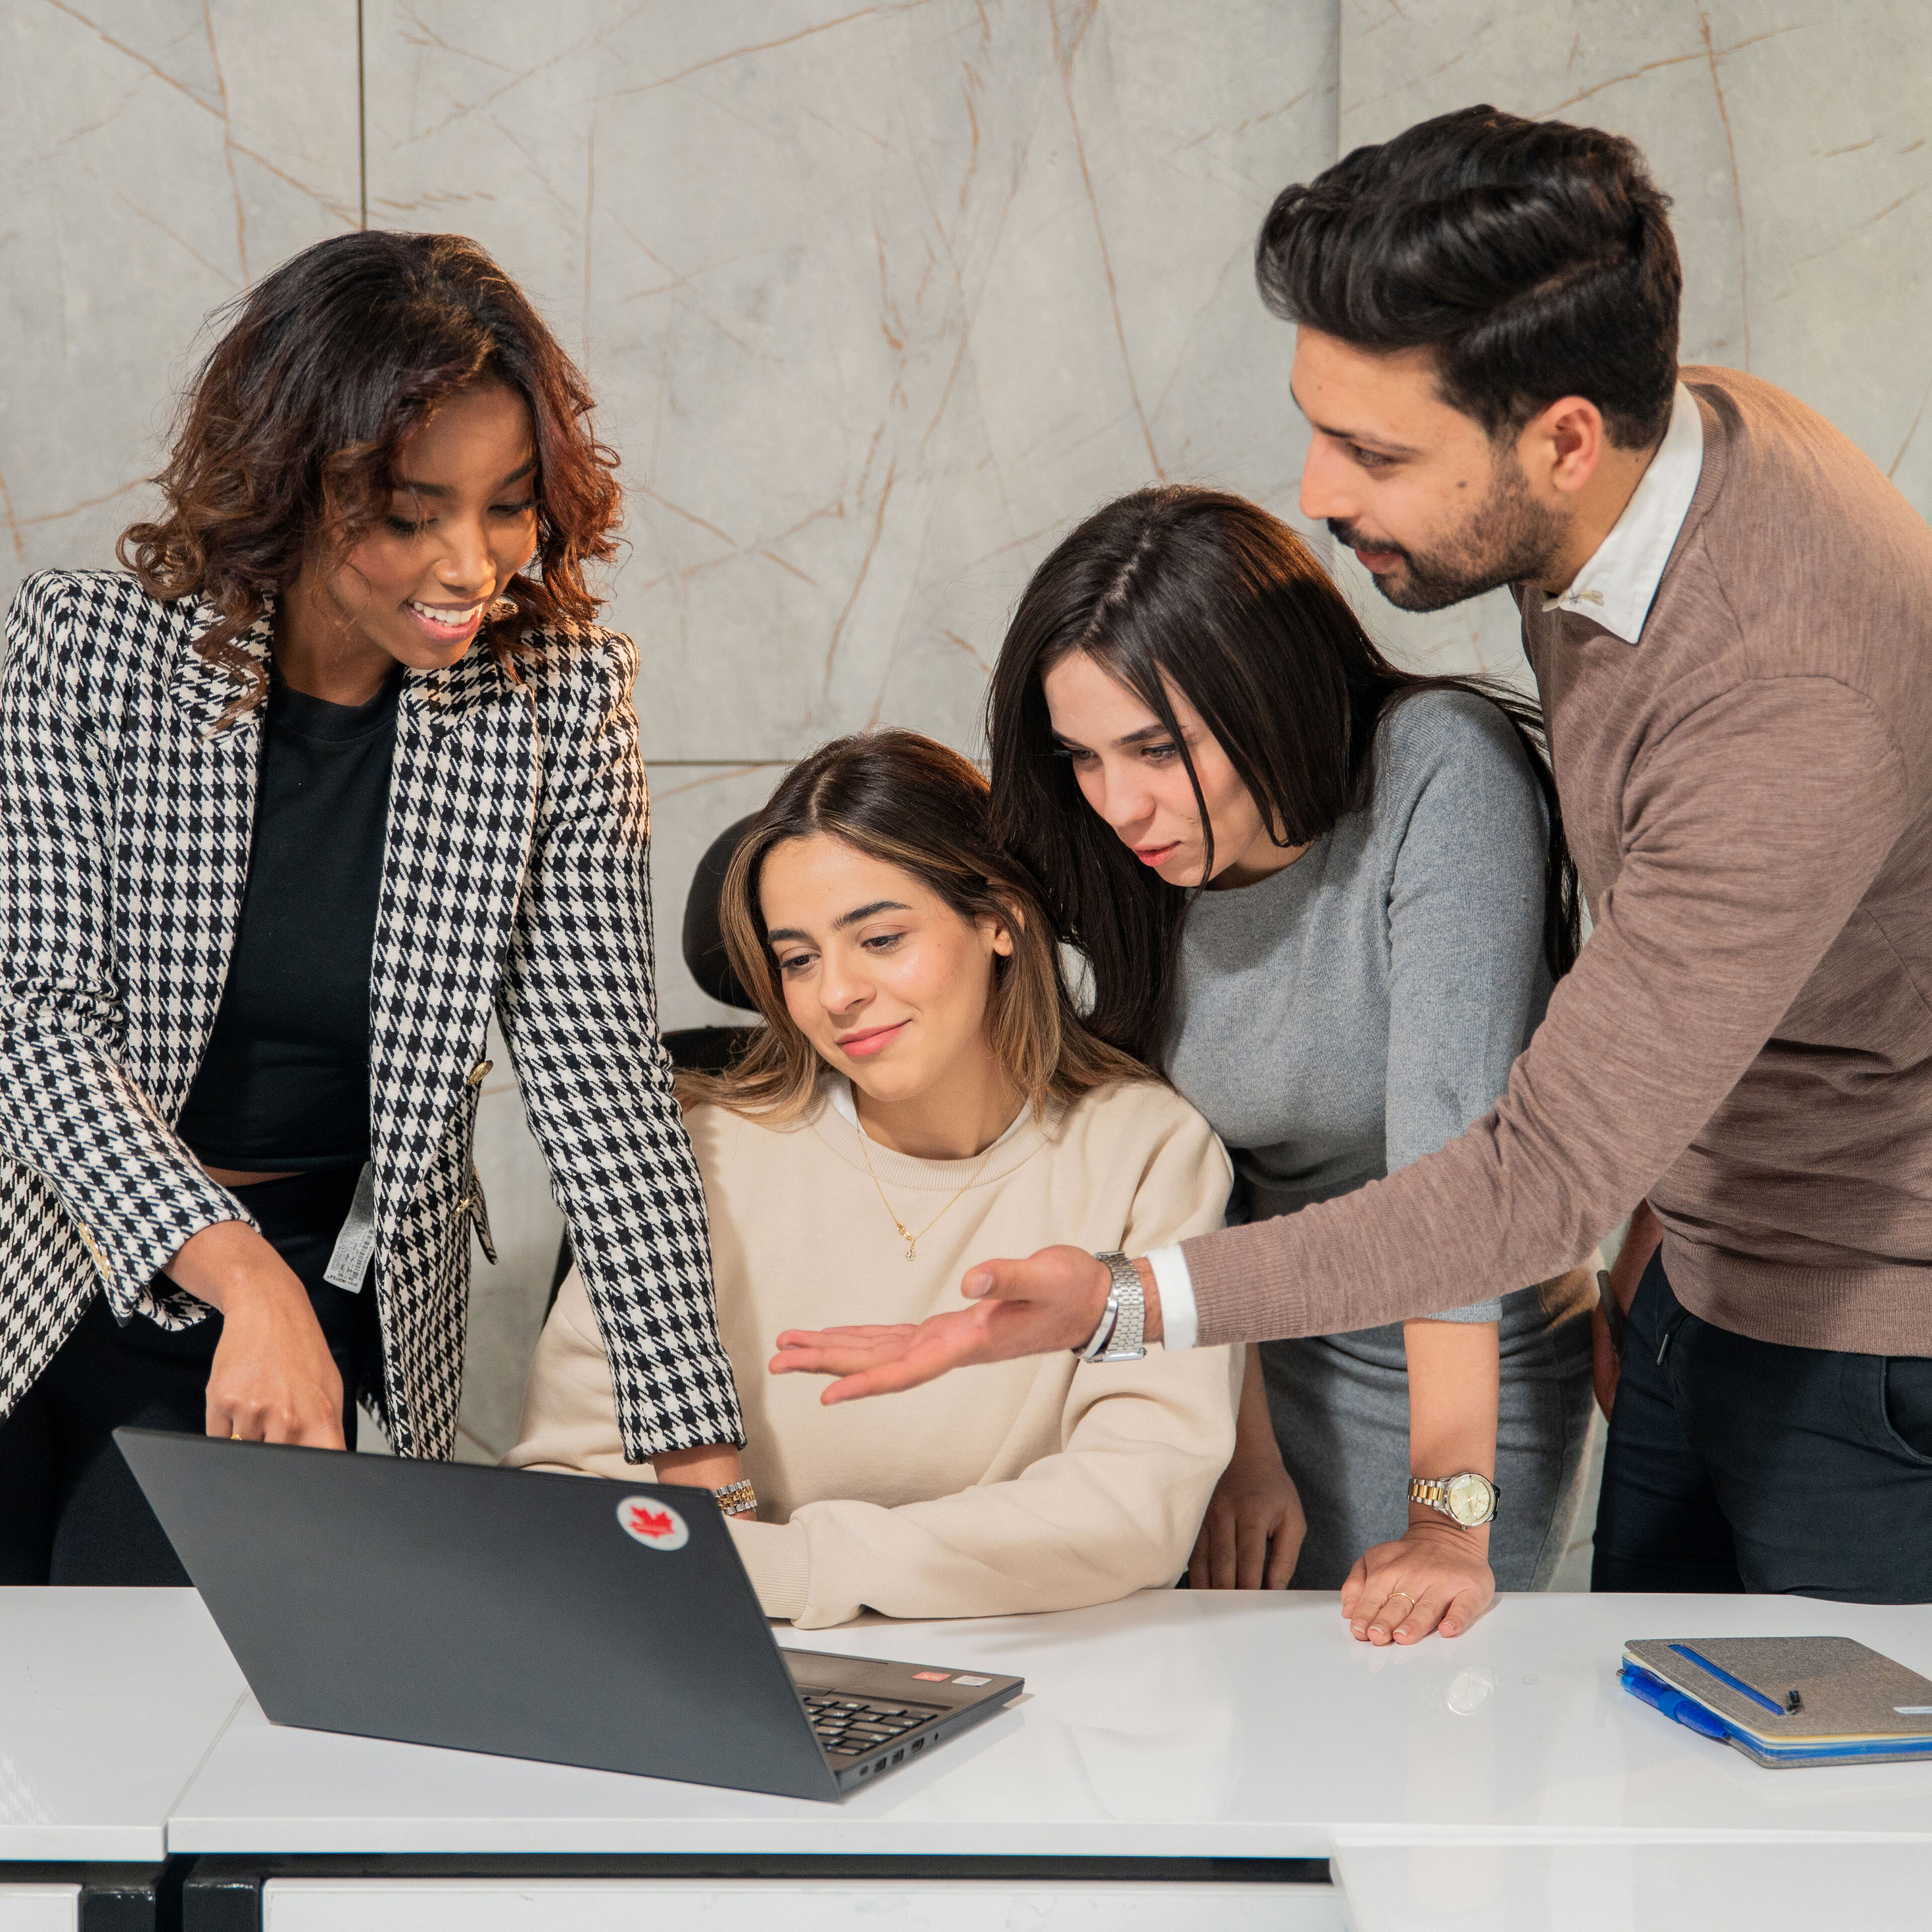 Four professionals gathered around a laptop, actively engaged in a discussion, with positive expressions and a modern office background.